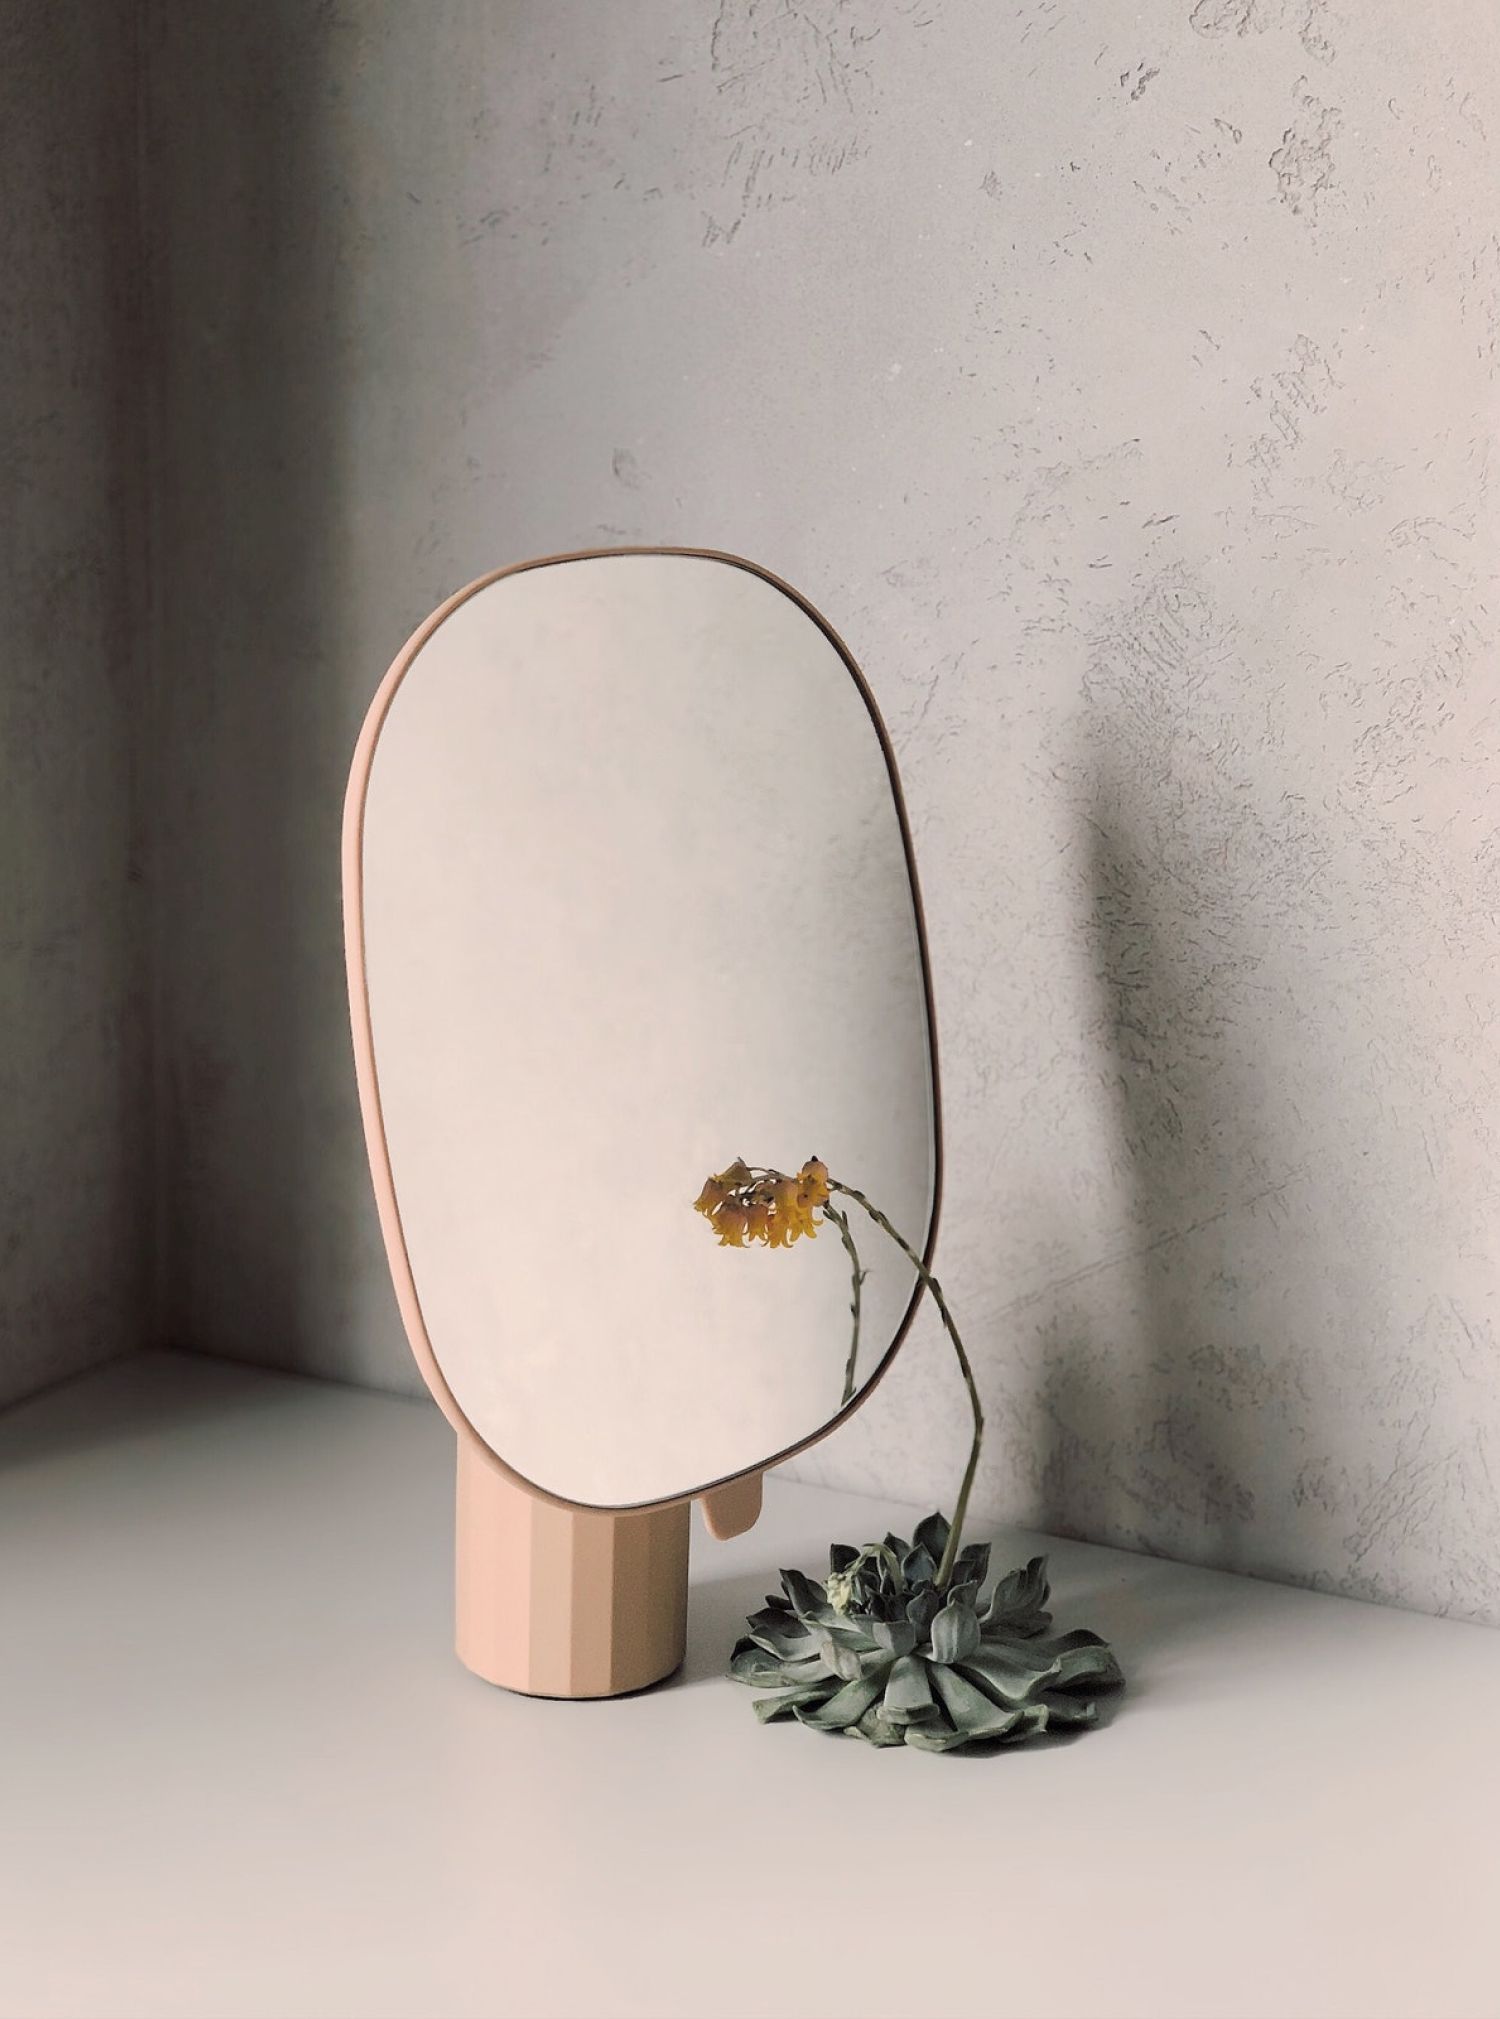 A mirror with a flower in it is sitting on a table.